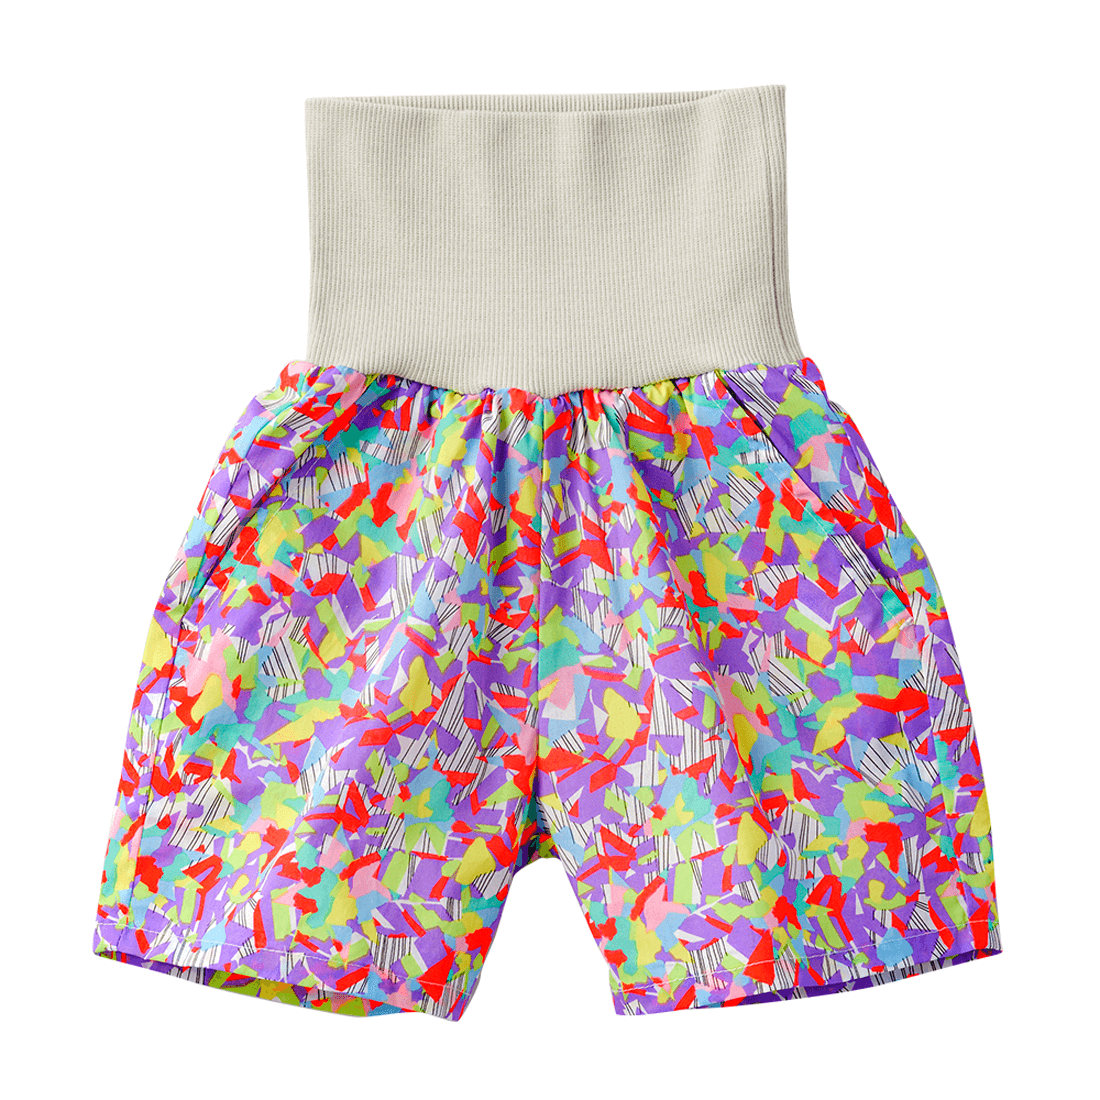 MARLMARL doudou shorts orchid